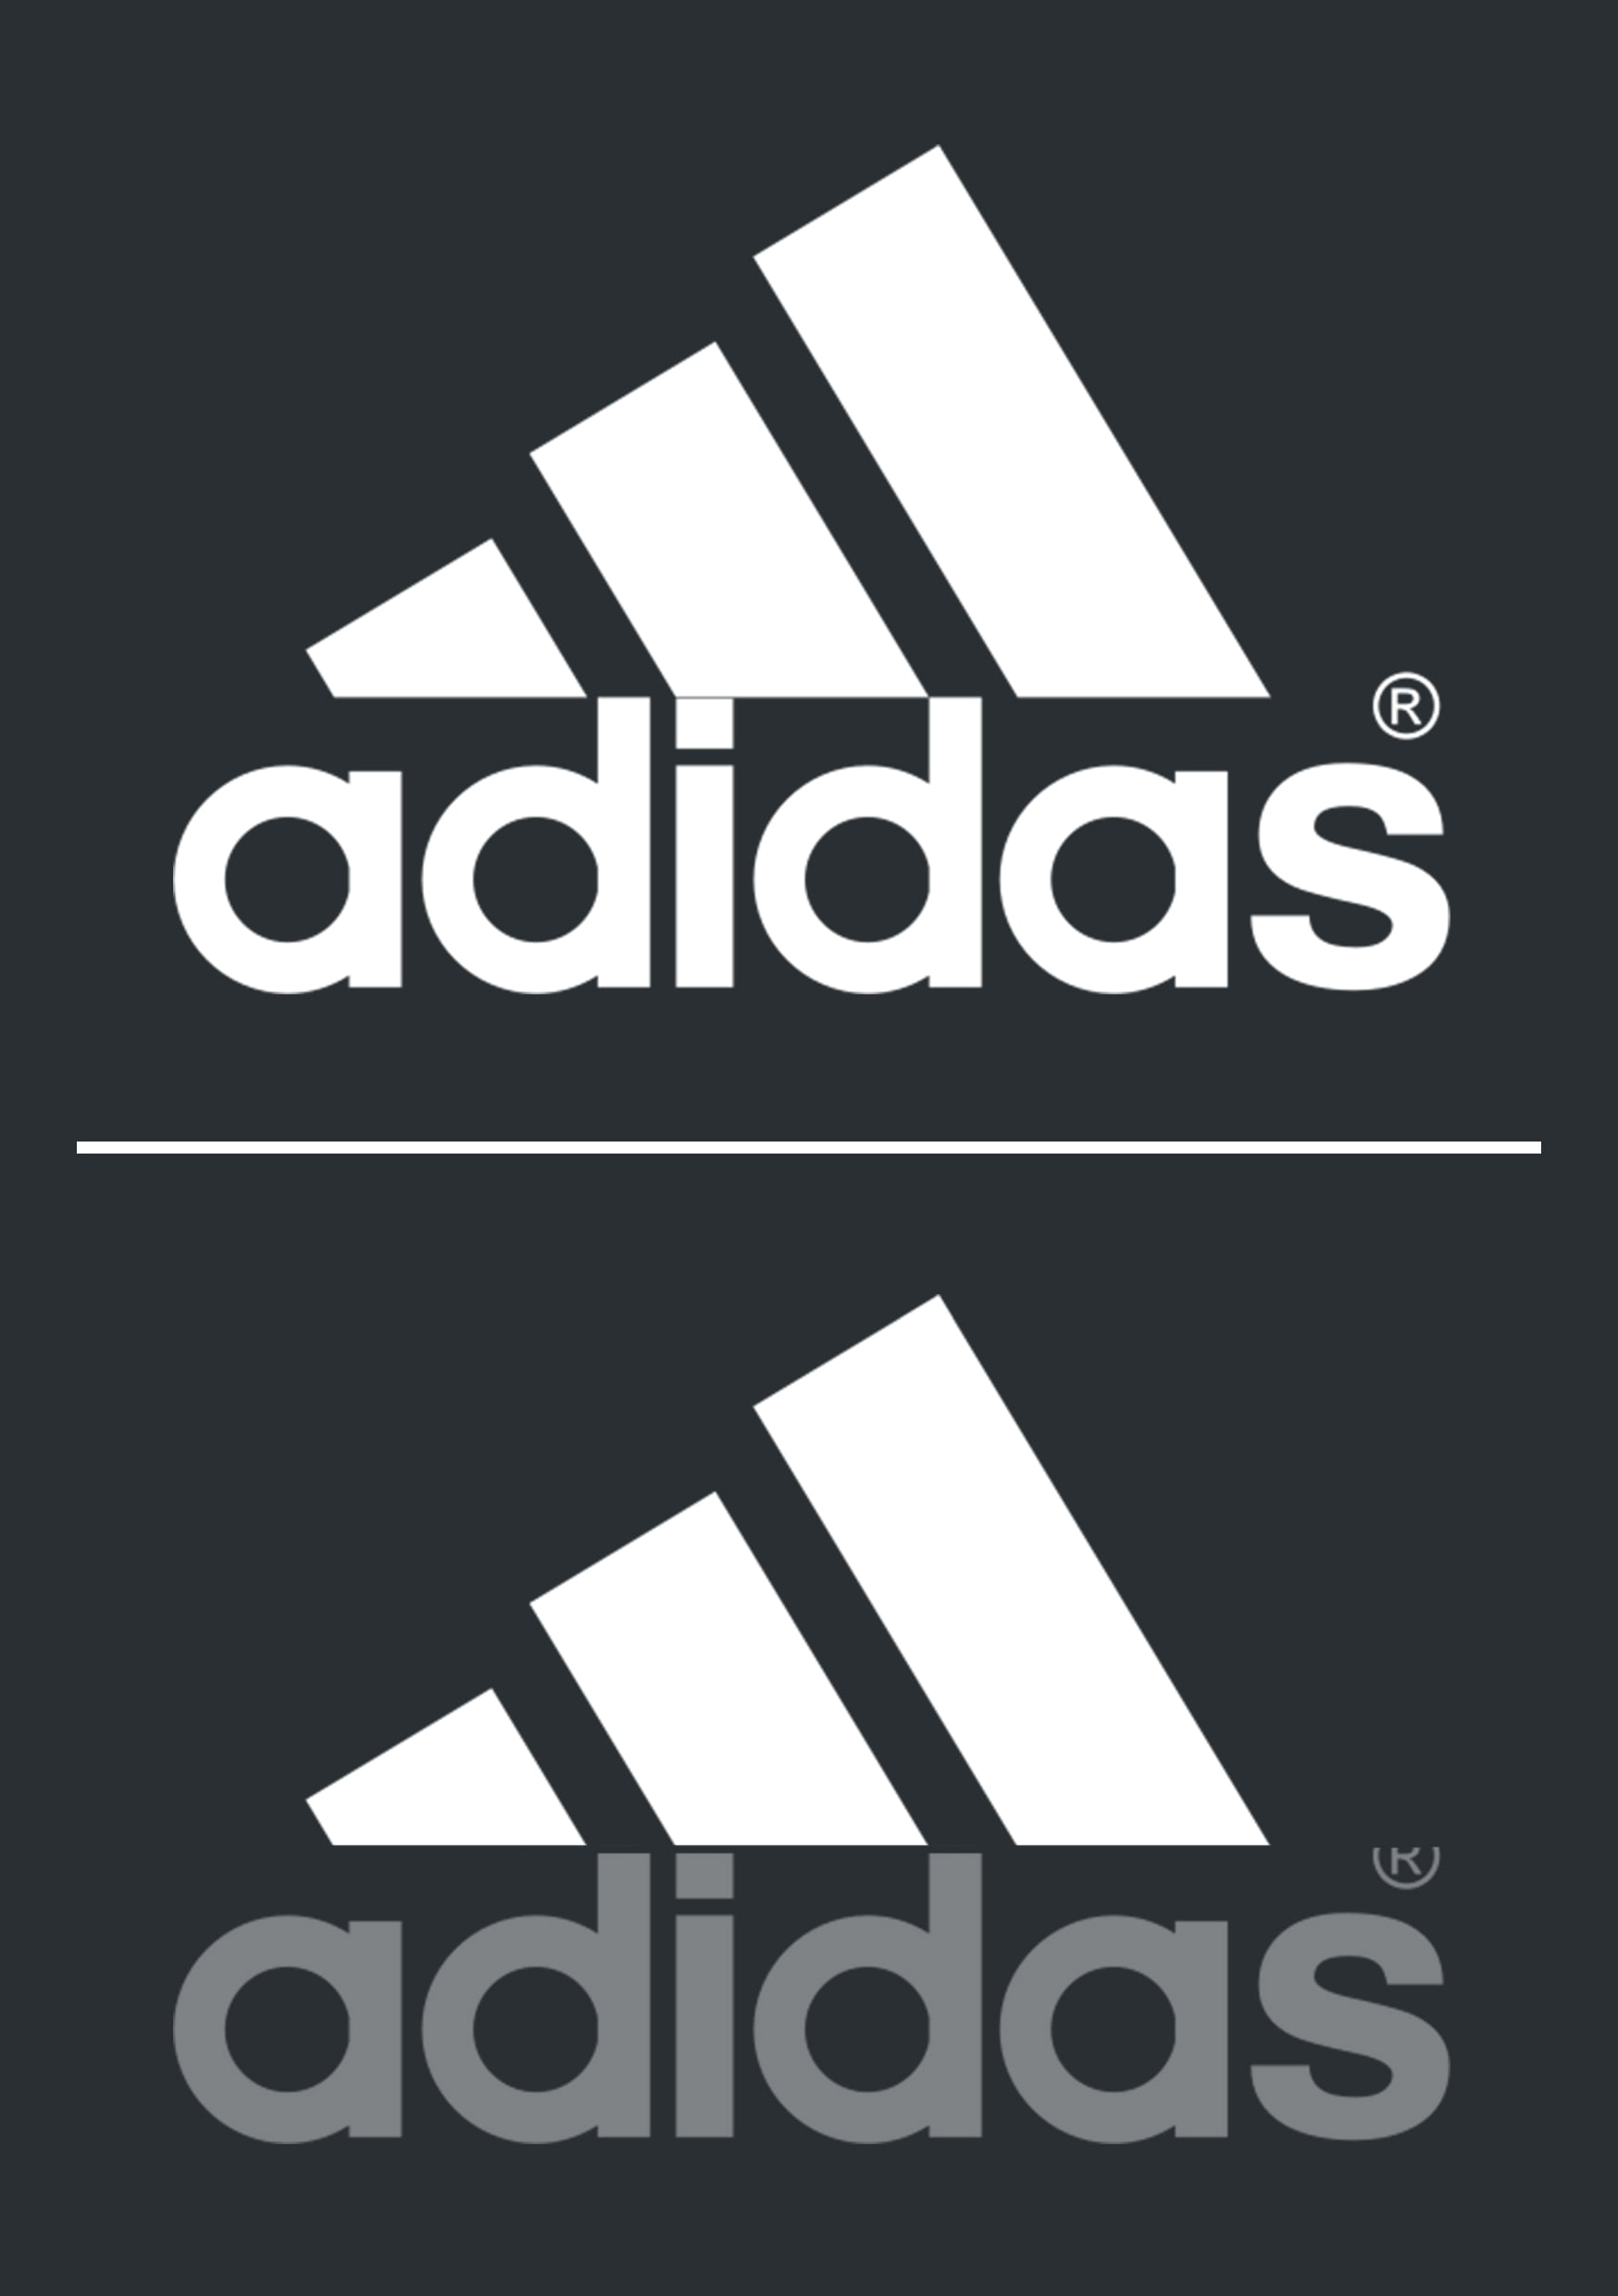 meaning of adidas in hindi